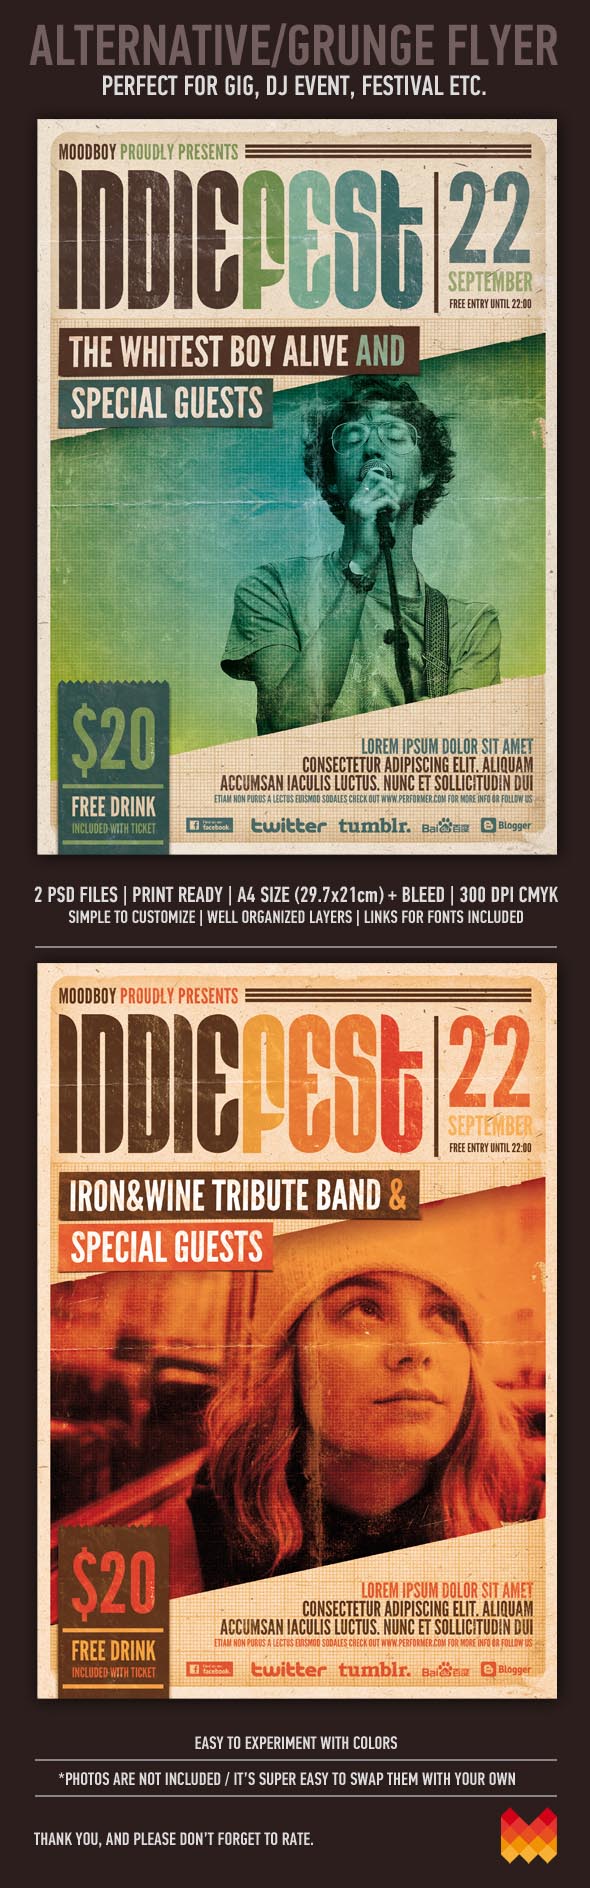 Indie Fest Flyer and Poster Design by moodboy